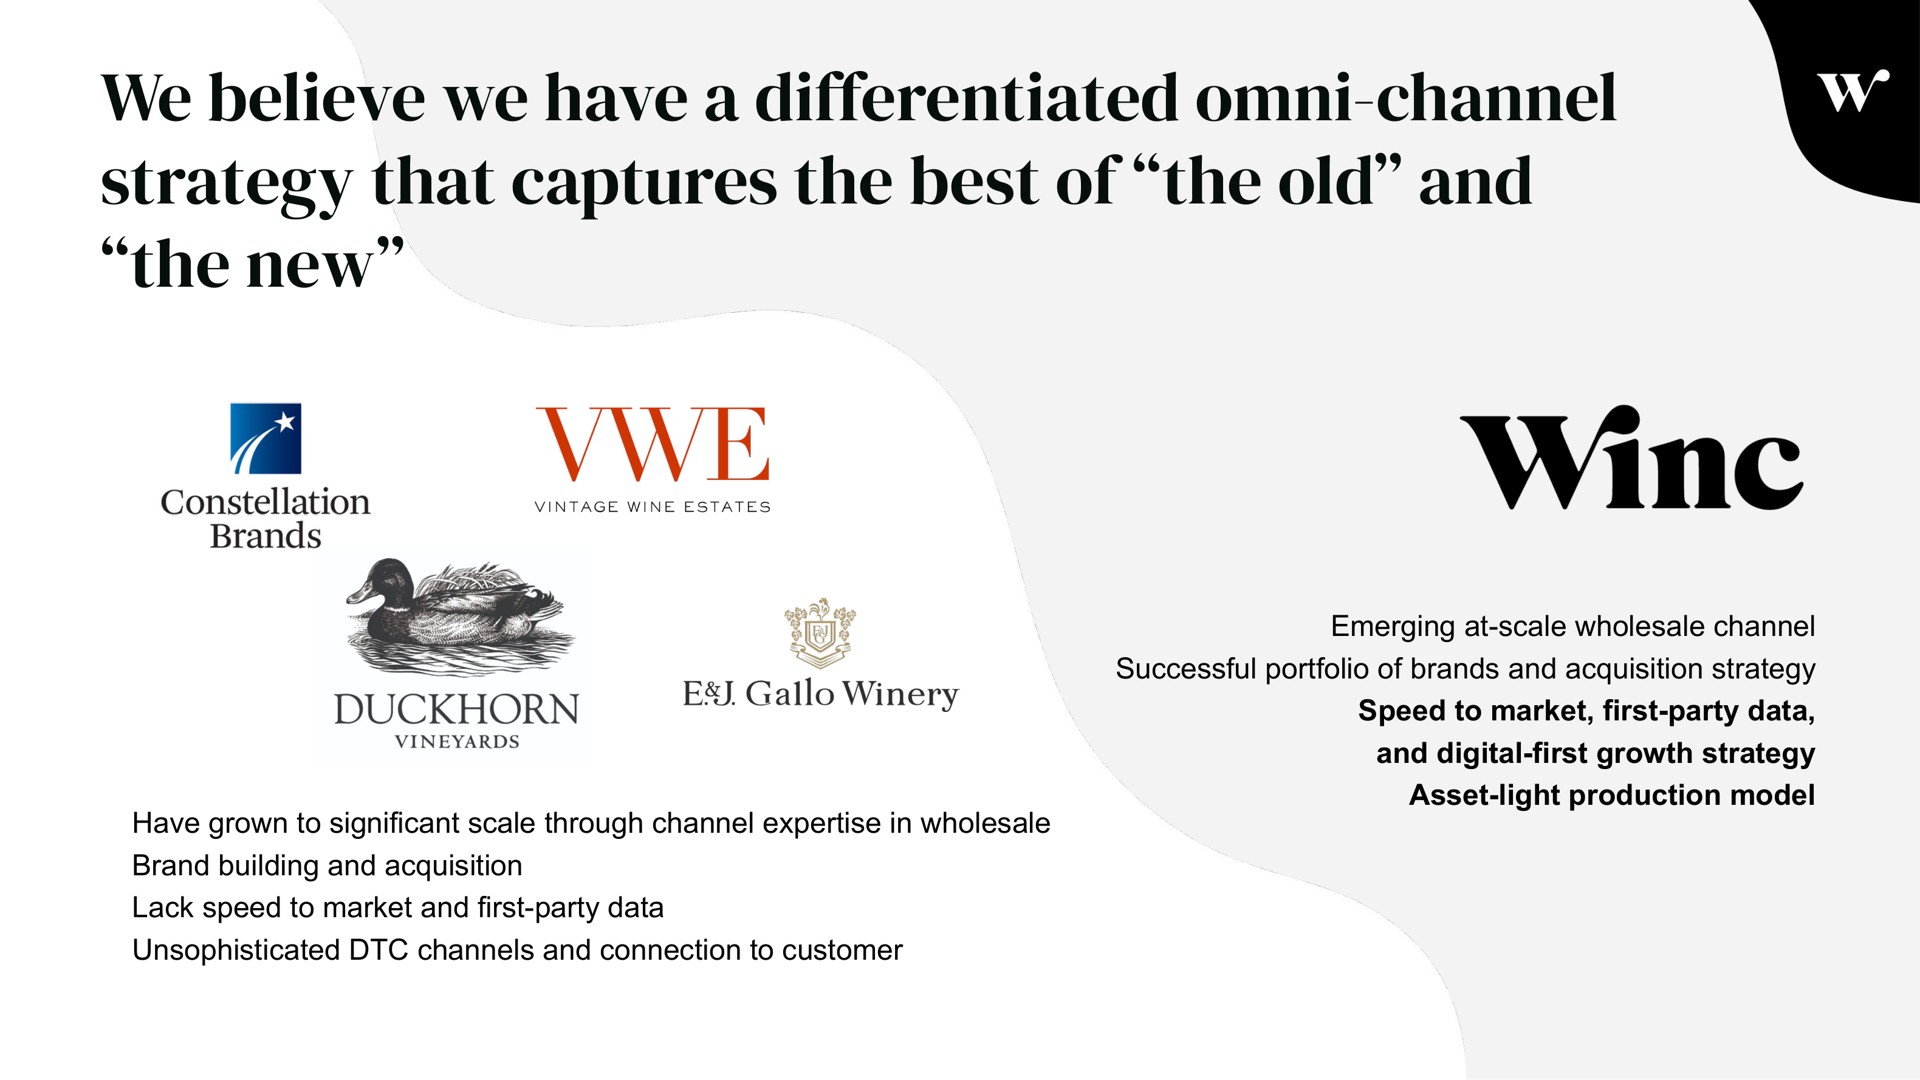 we believe we have a differentiated channel strategy that captures the best of the old and the new | Winc